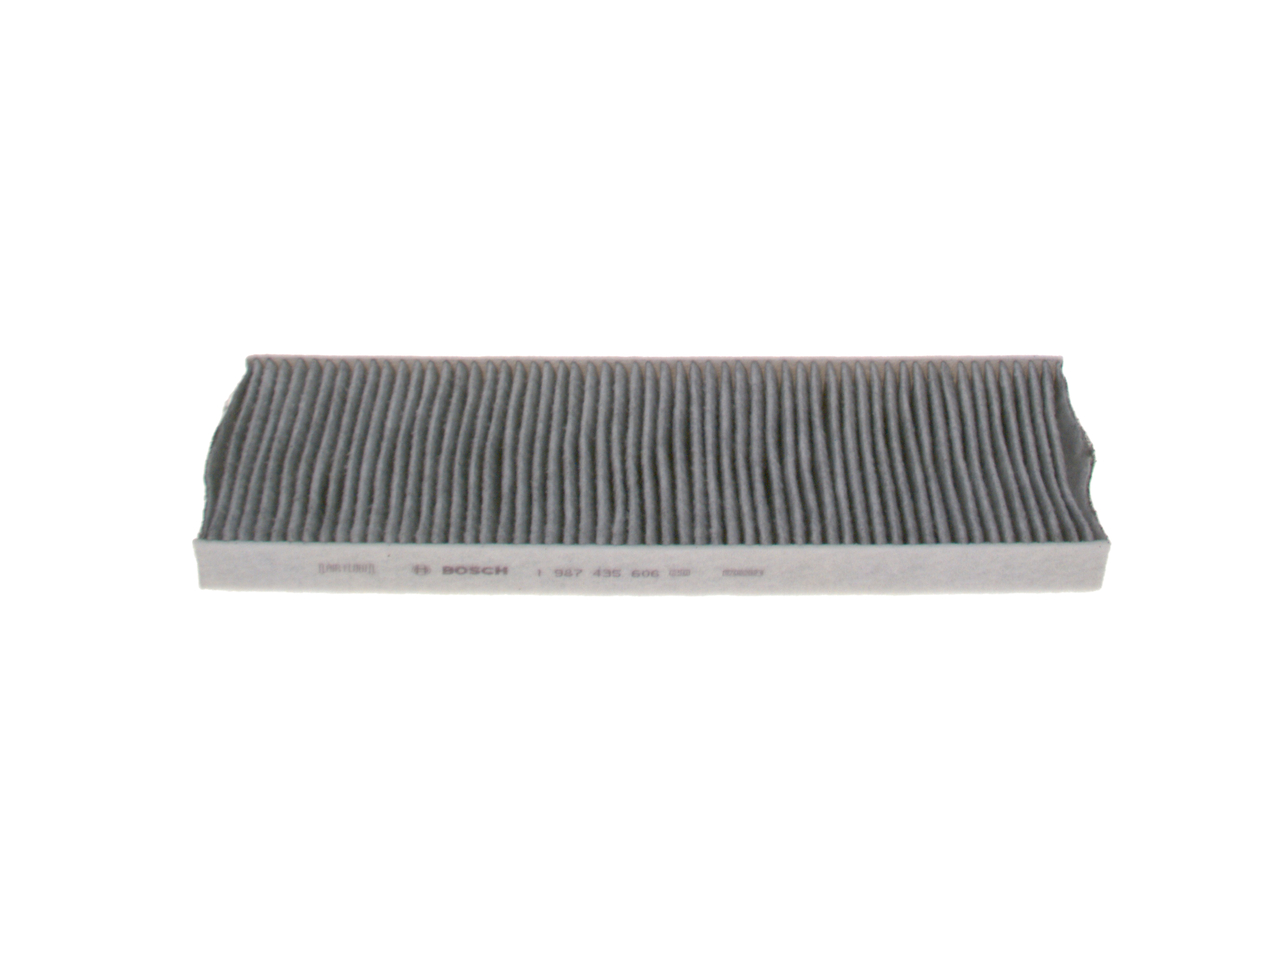 R 5606 BOSCH Activated Carbon Filter, 448 mm x 151 mm x 31 mm Width: 151mm, Height: 31mm, Length: 448mm Cabin filter 1 987 435 606 buy